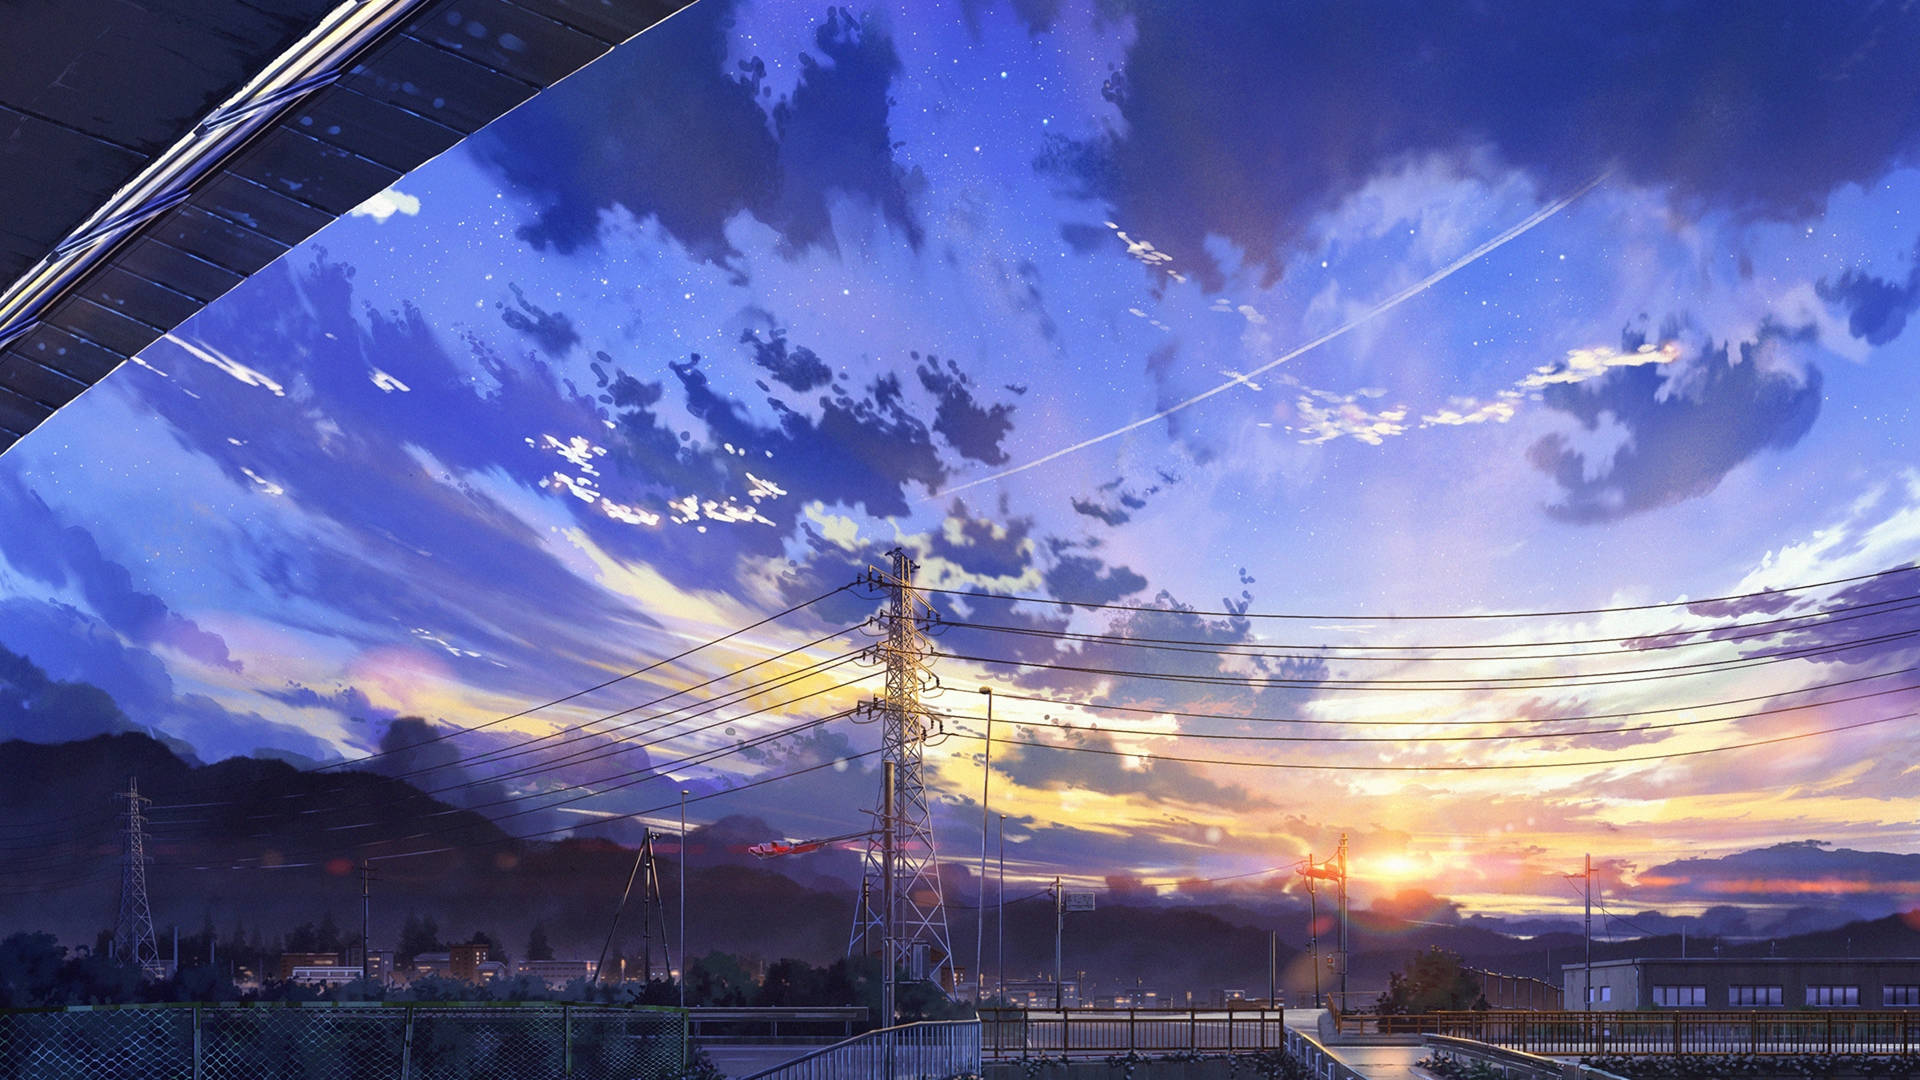 Enjoy the tranquil beauty of this picturesque anime scenery. Wallpaper